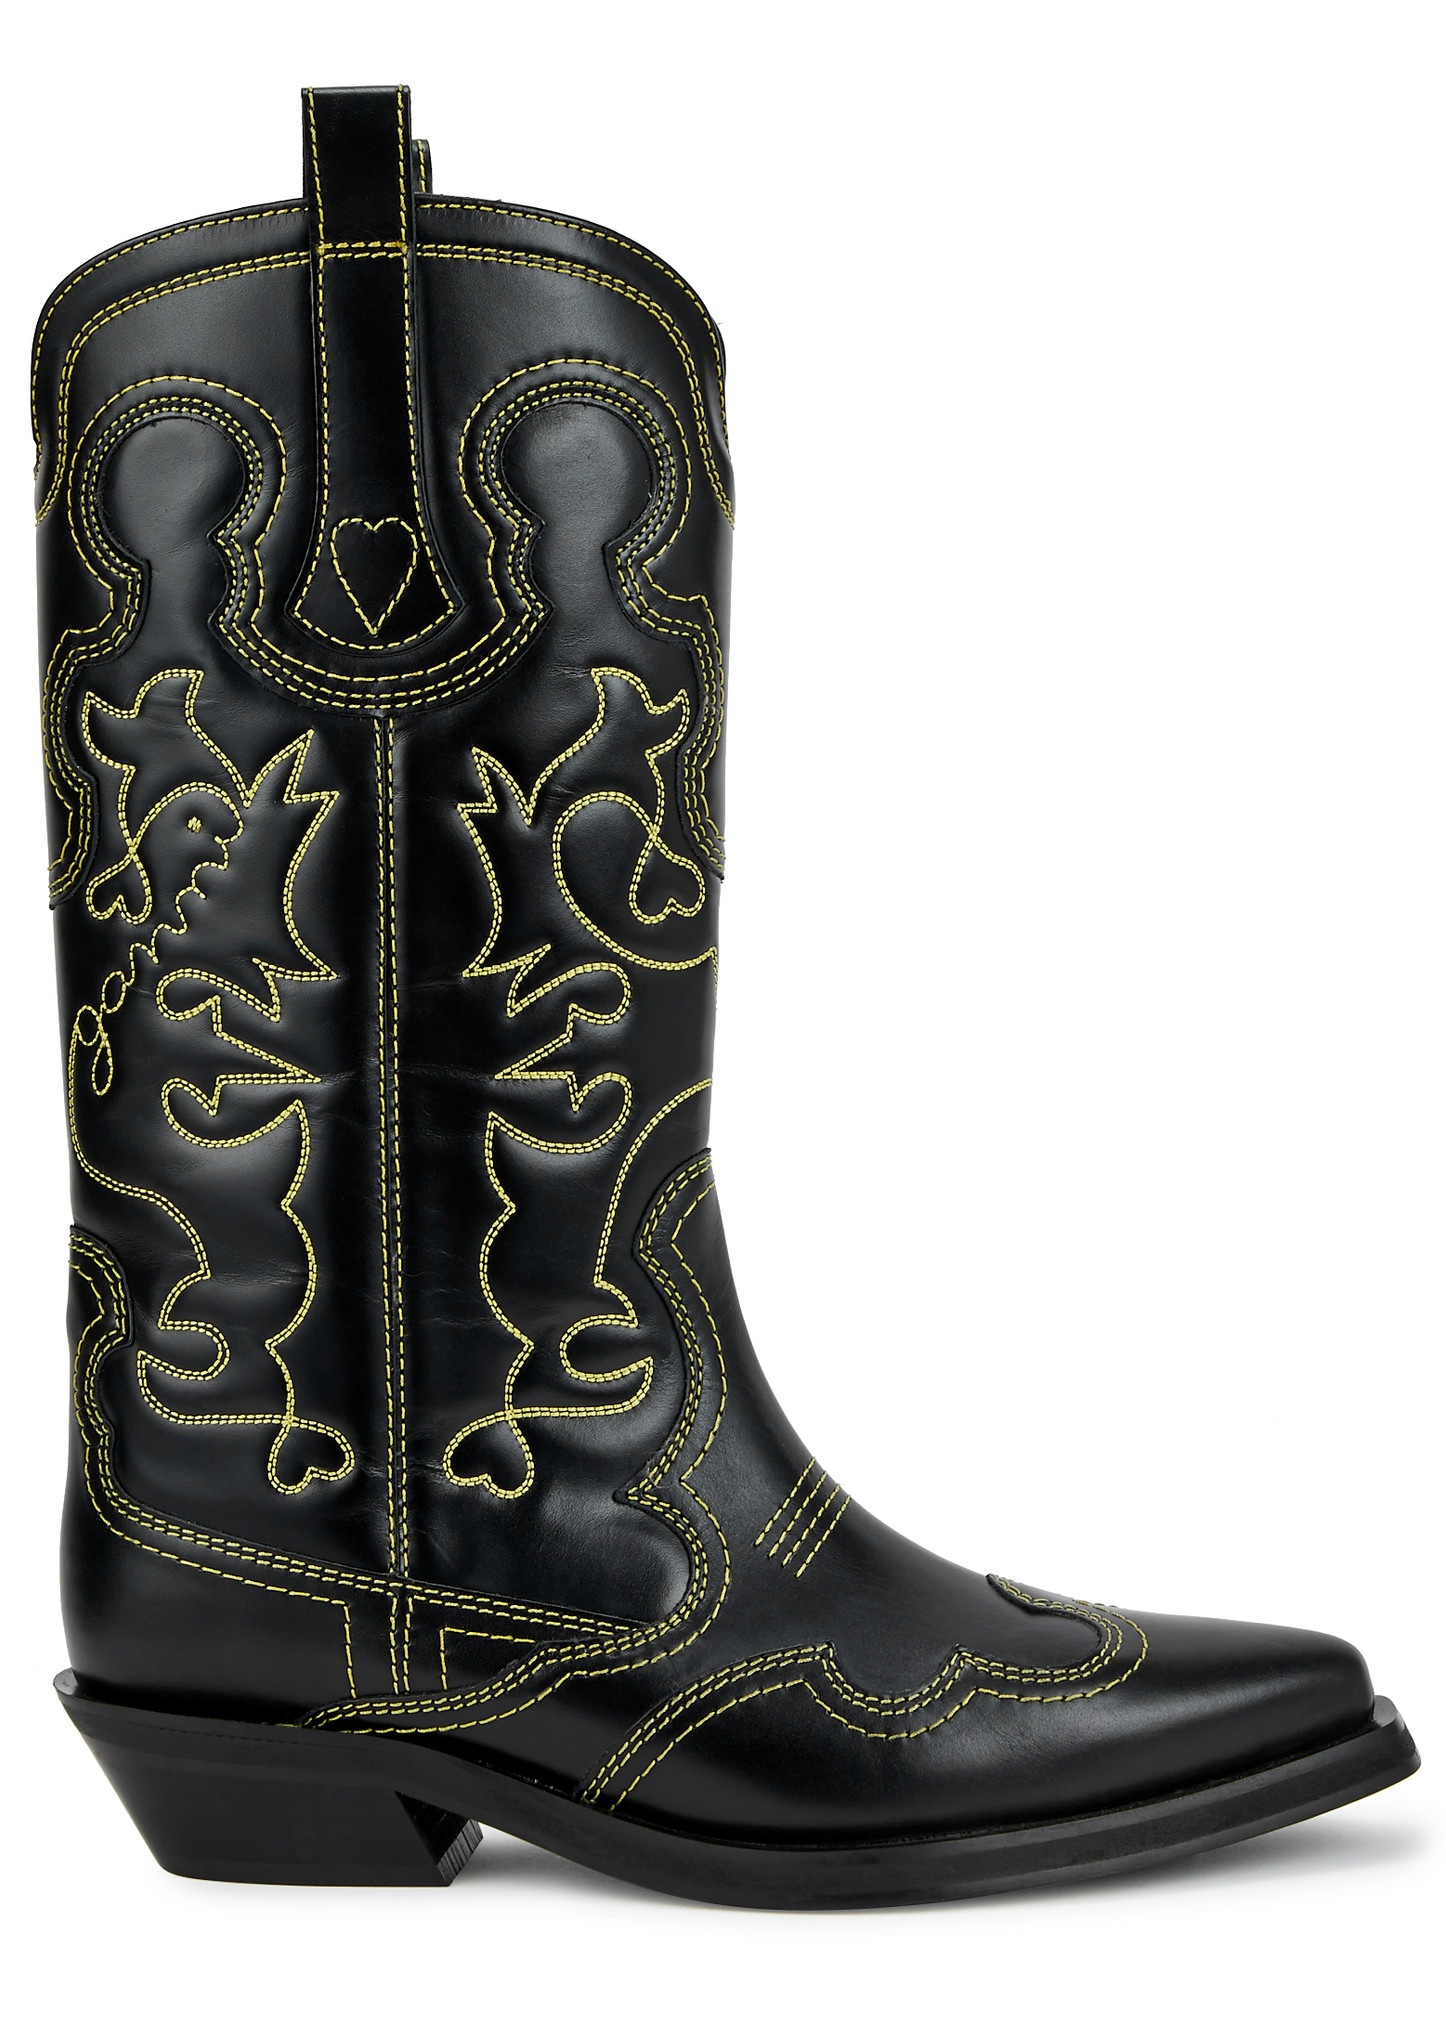 Embroidered leather cowboy boots - 1